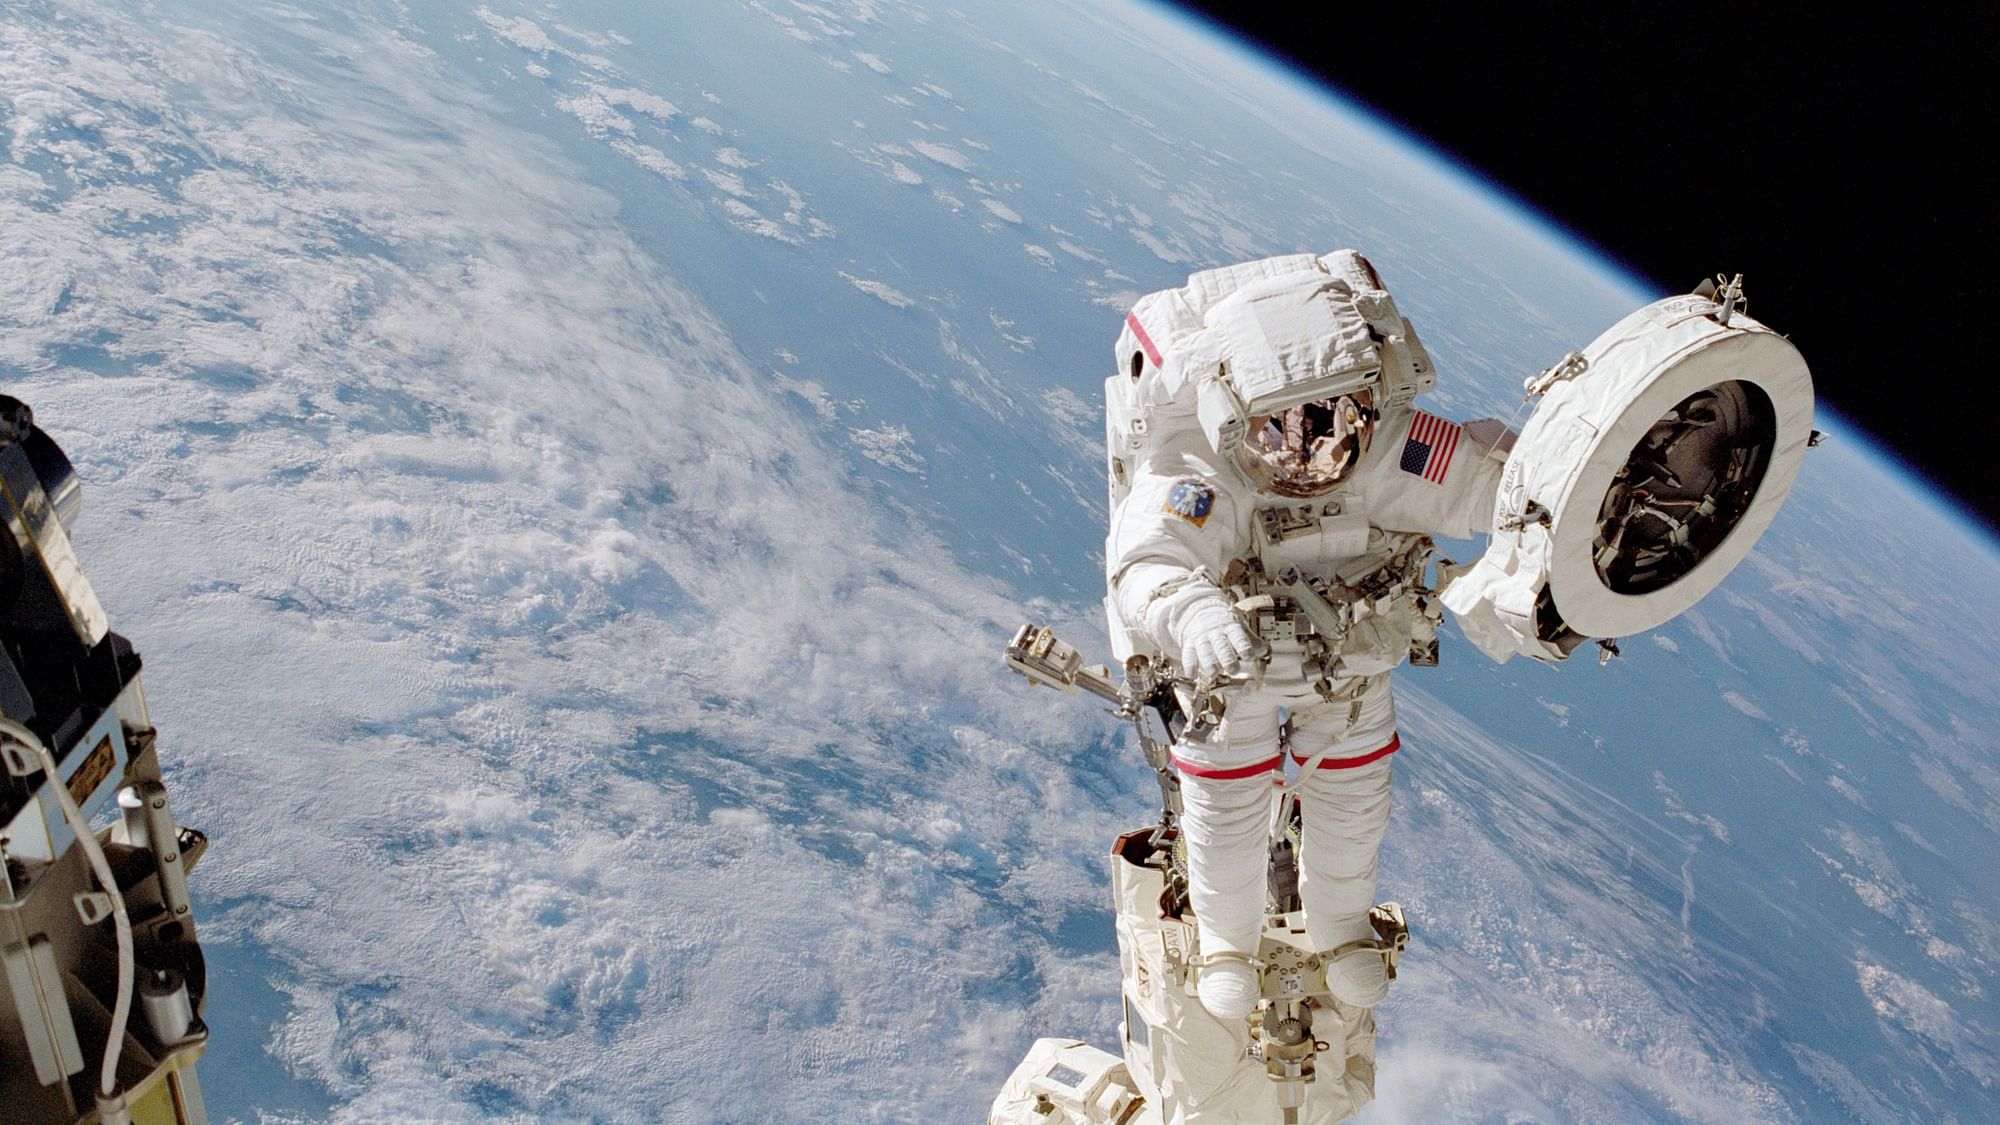 (Photo Courtesy: <a href="https://www.nasa.gov/audience/forstudents/k-4/stories/nasa-knows/what-is-a-spacewalk-k4.html">NASA</a>)